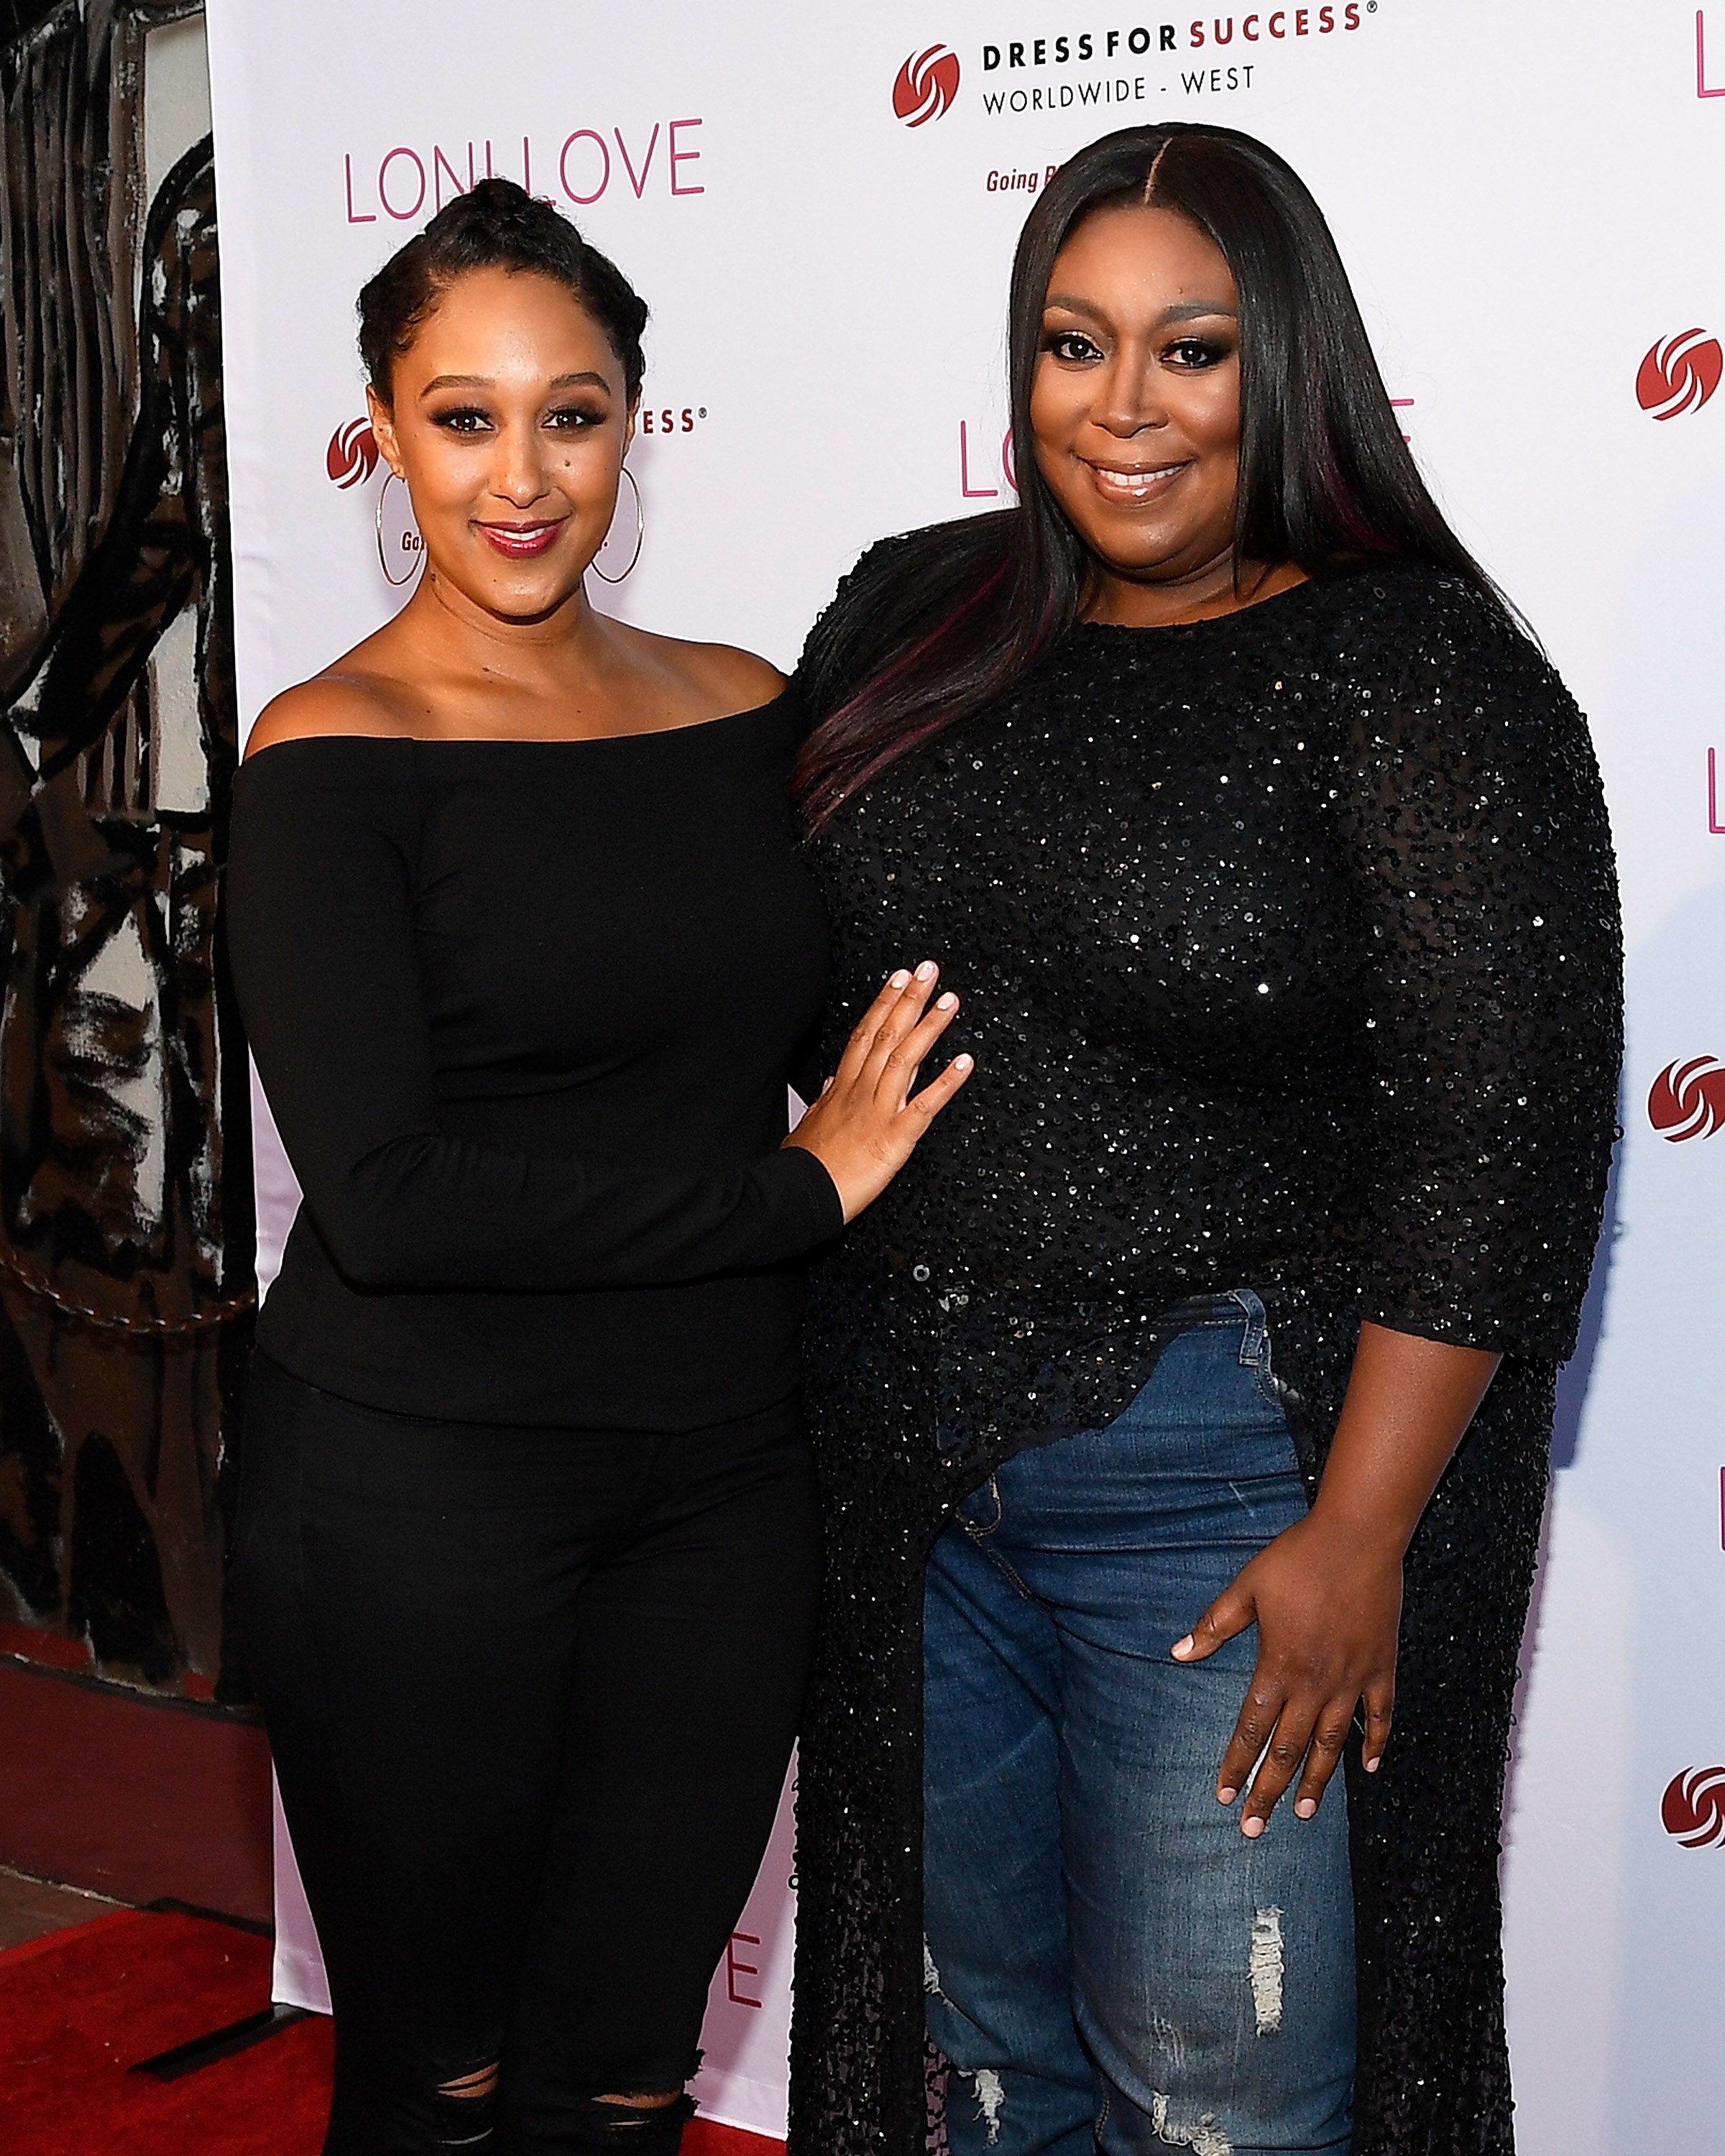 The Real" co-hosts Tamera Mowry (L) and Loni Love attend Loni Love's Birthday Roast benefiting the Dress For Success charity at Hollywood Improv on July 12, 2017 in Hollywood, California. | Photo: Getty Images